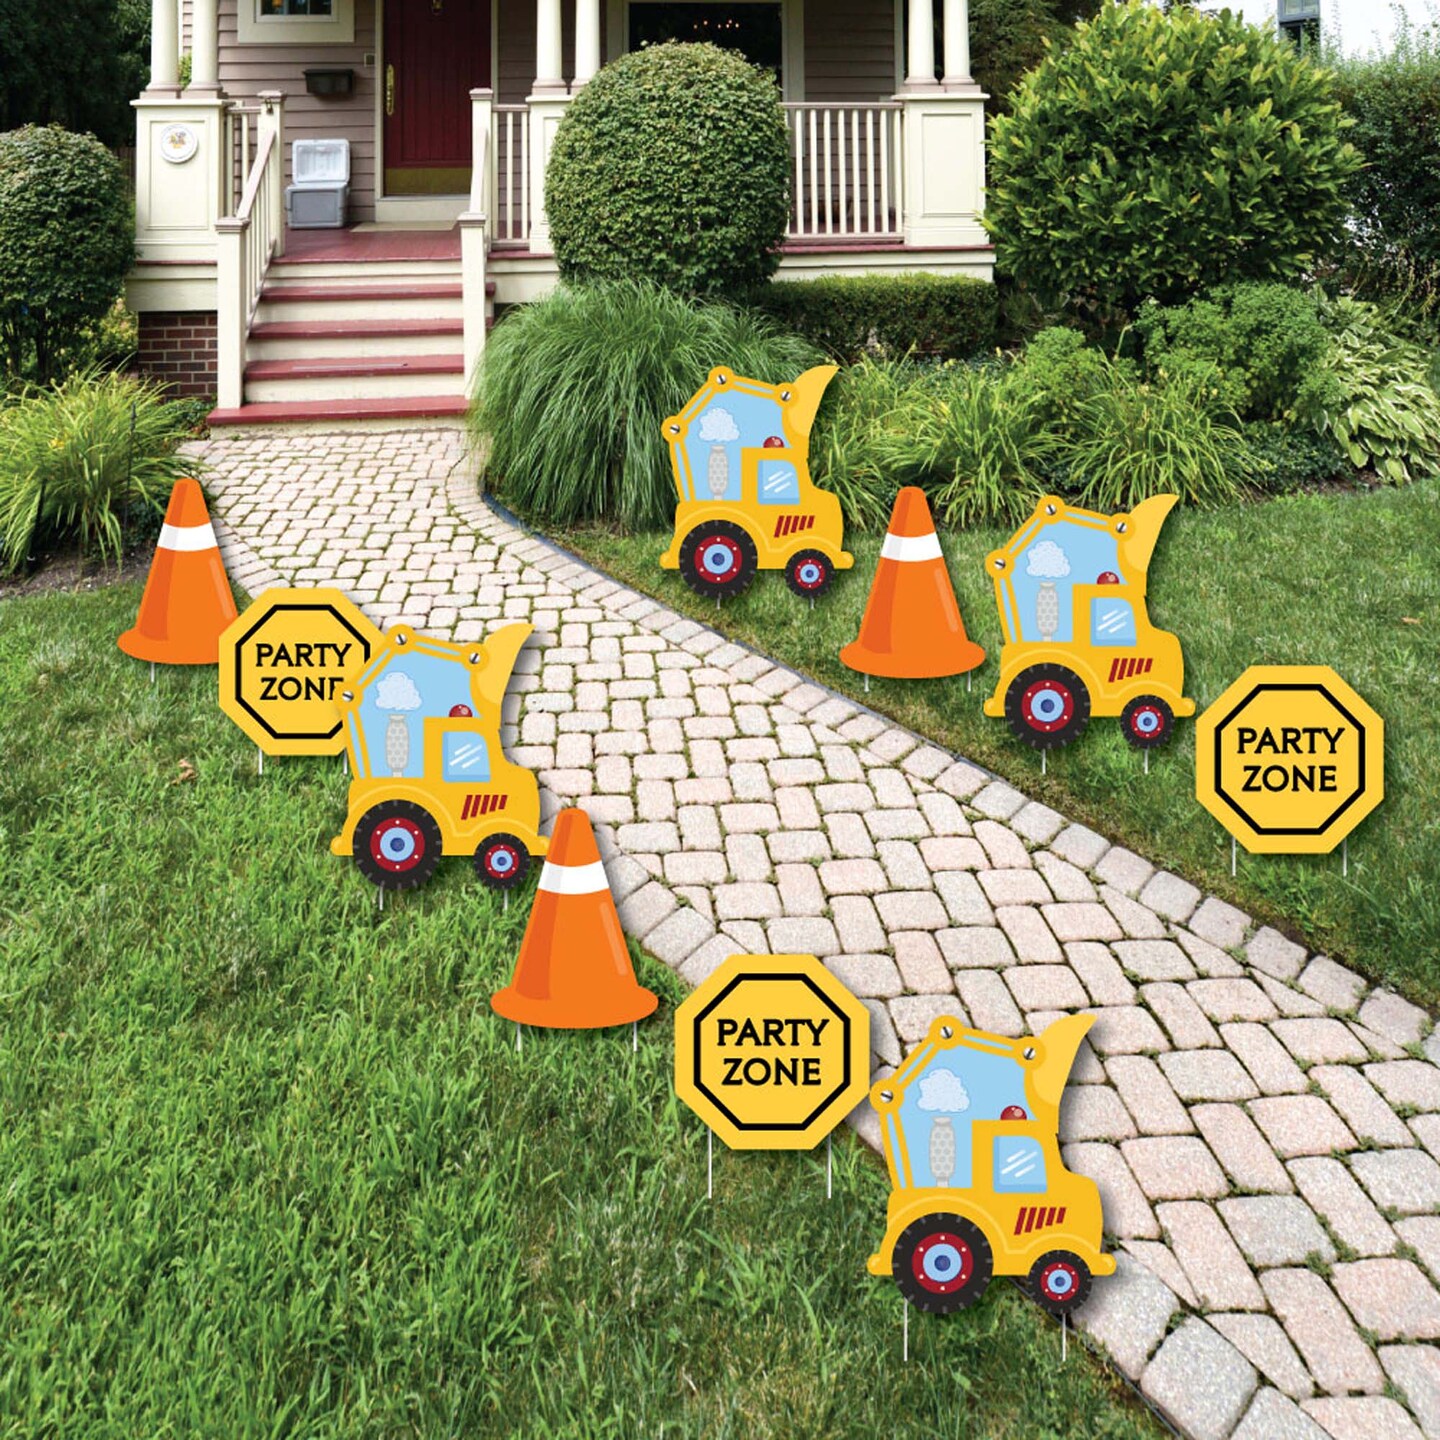 Big Dot of Happiness Construction Truck - Construction Zone Lawn Decorations - Outdoor Baby Shower or Birthday Party Yard Decorations - 10 Piece